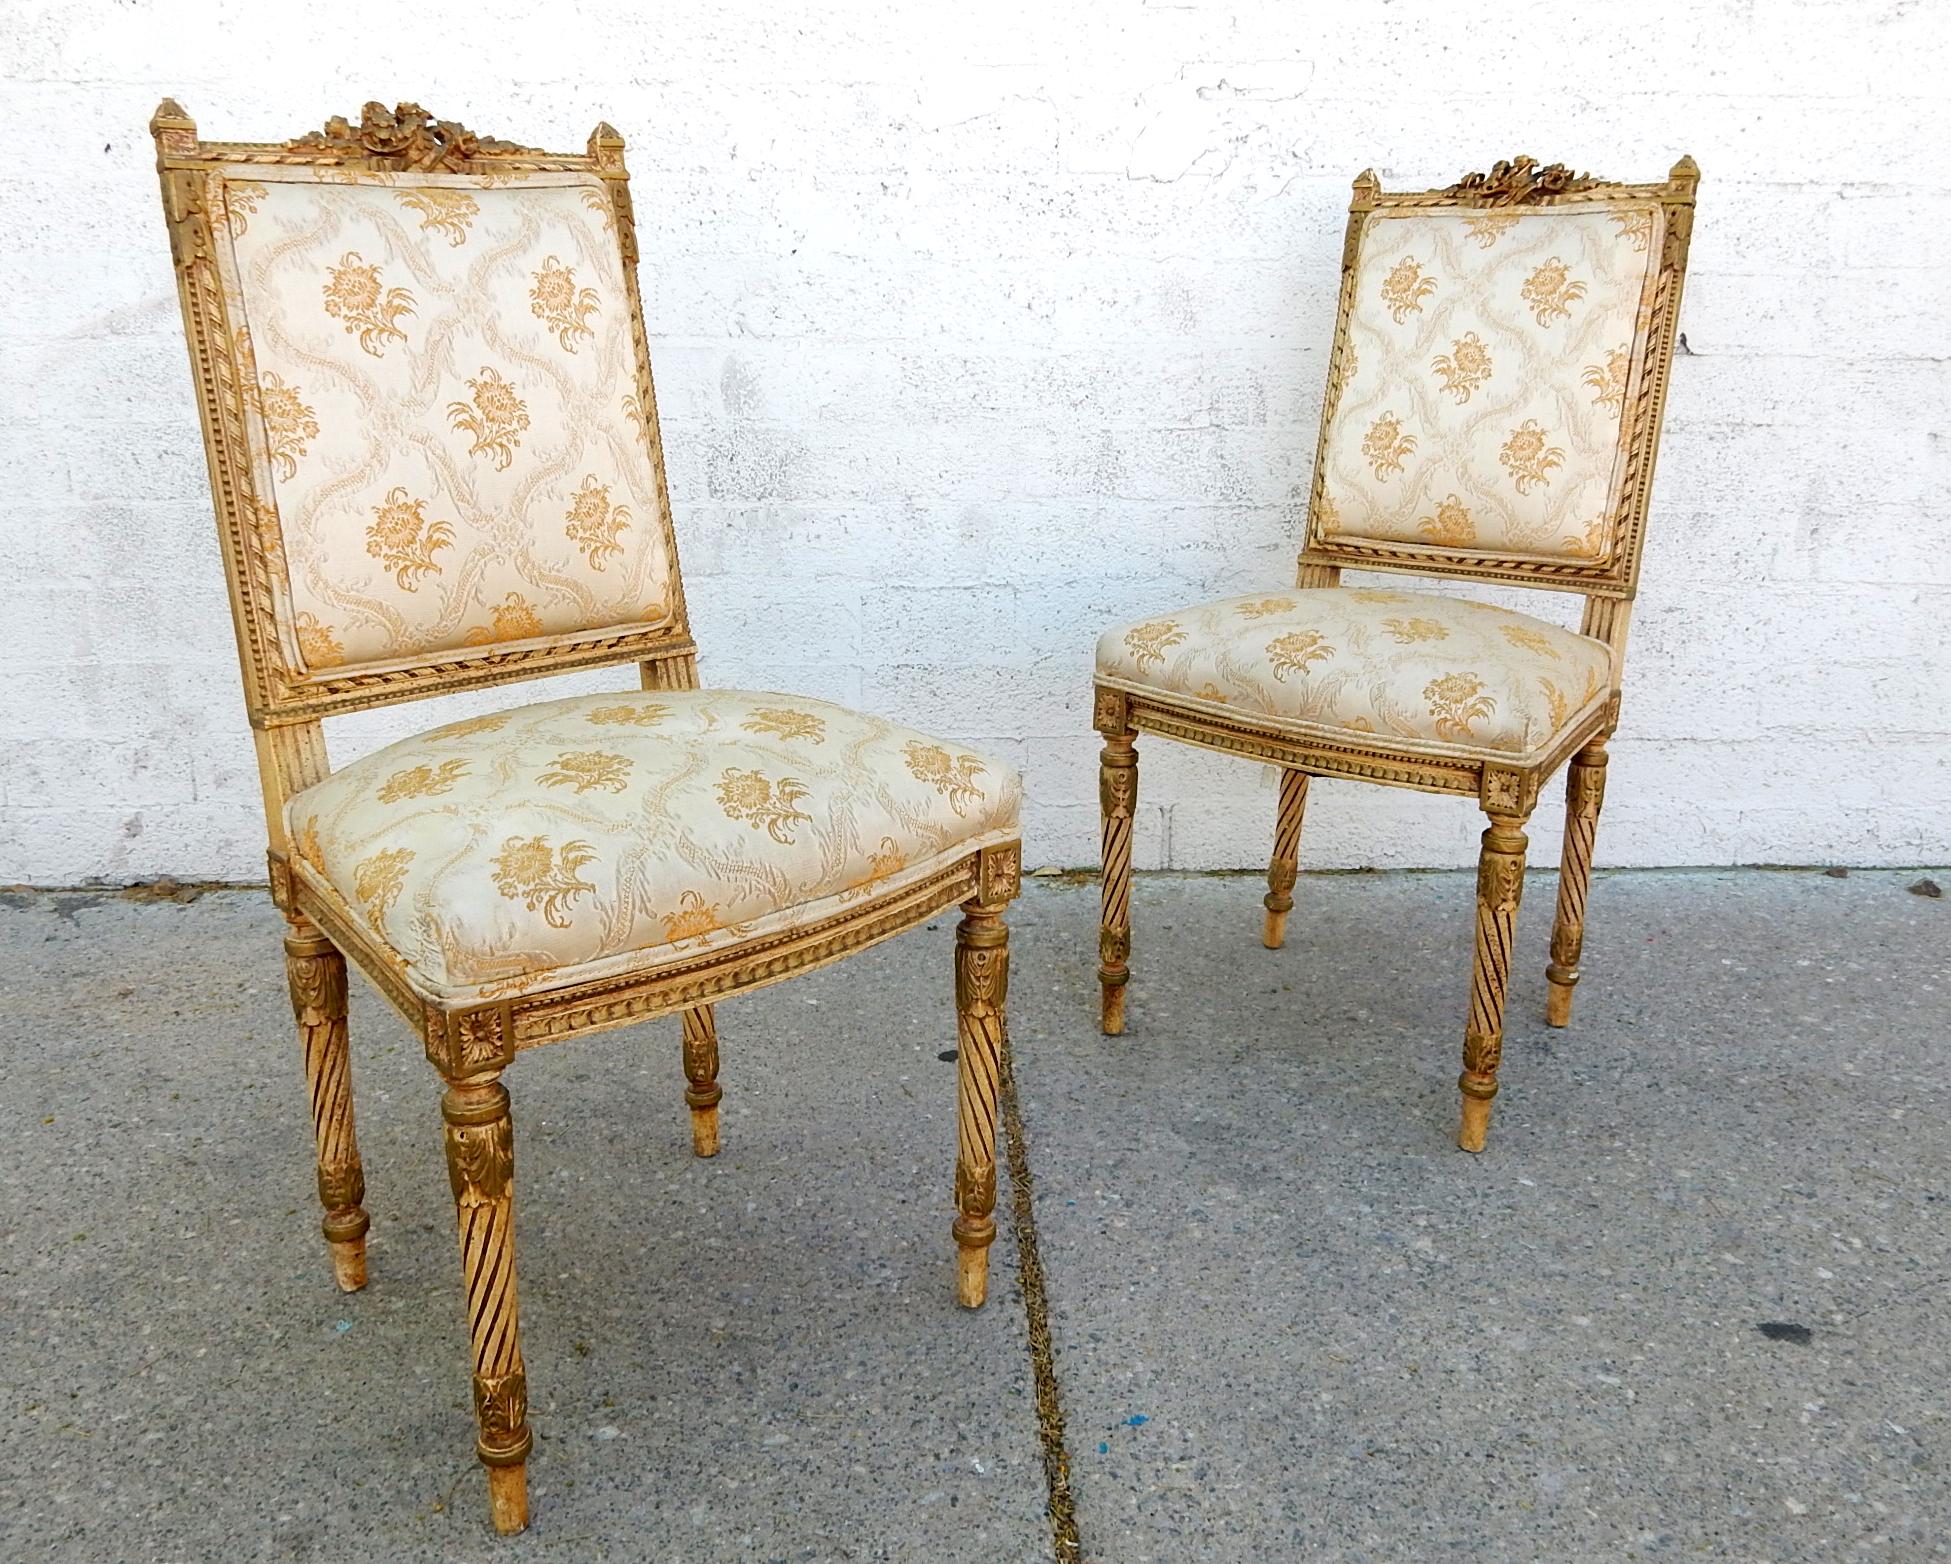 Parlor chairs in the Louis XVI style, circa 1940s.
Fine quality, attributed to Maison Jensen. 
Spring cushions. Ornate frame.
They look to be very well cared for in original finish/condition.